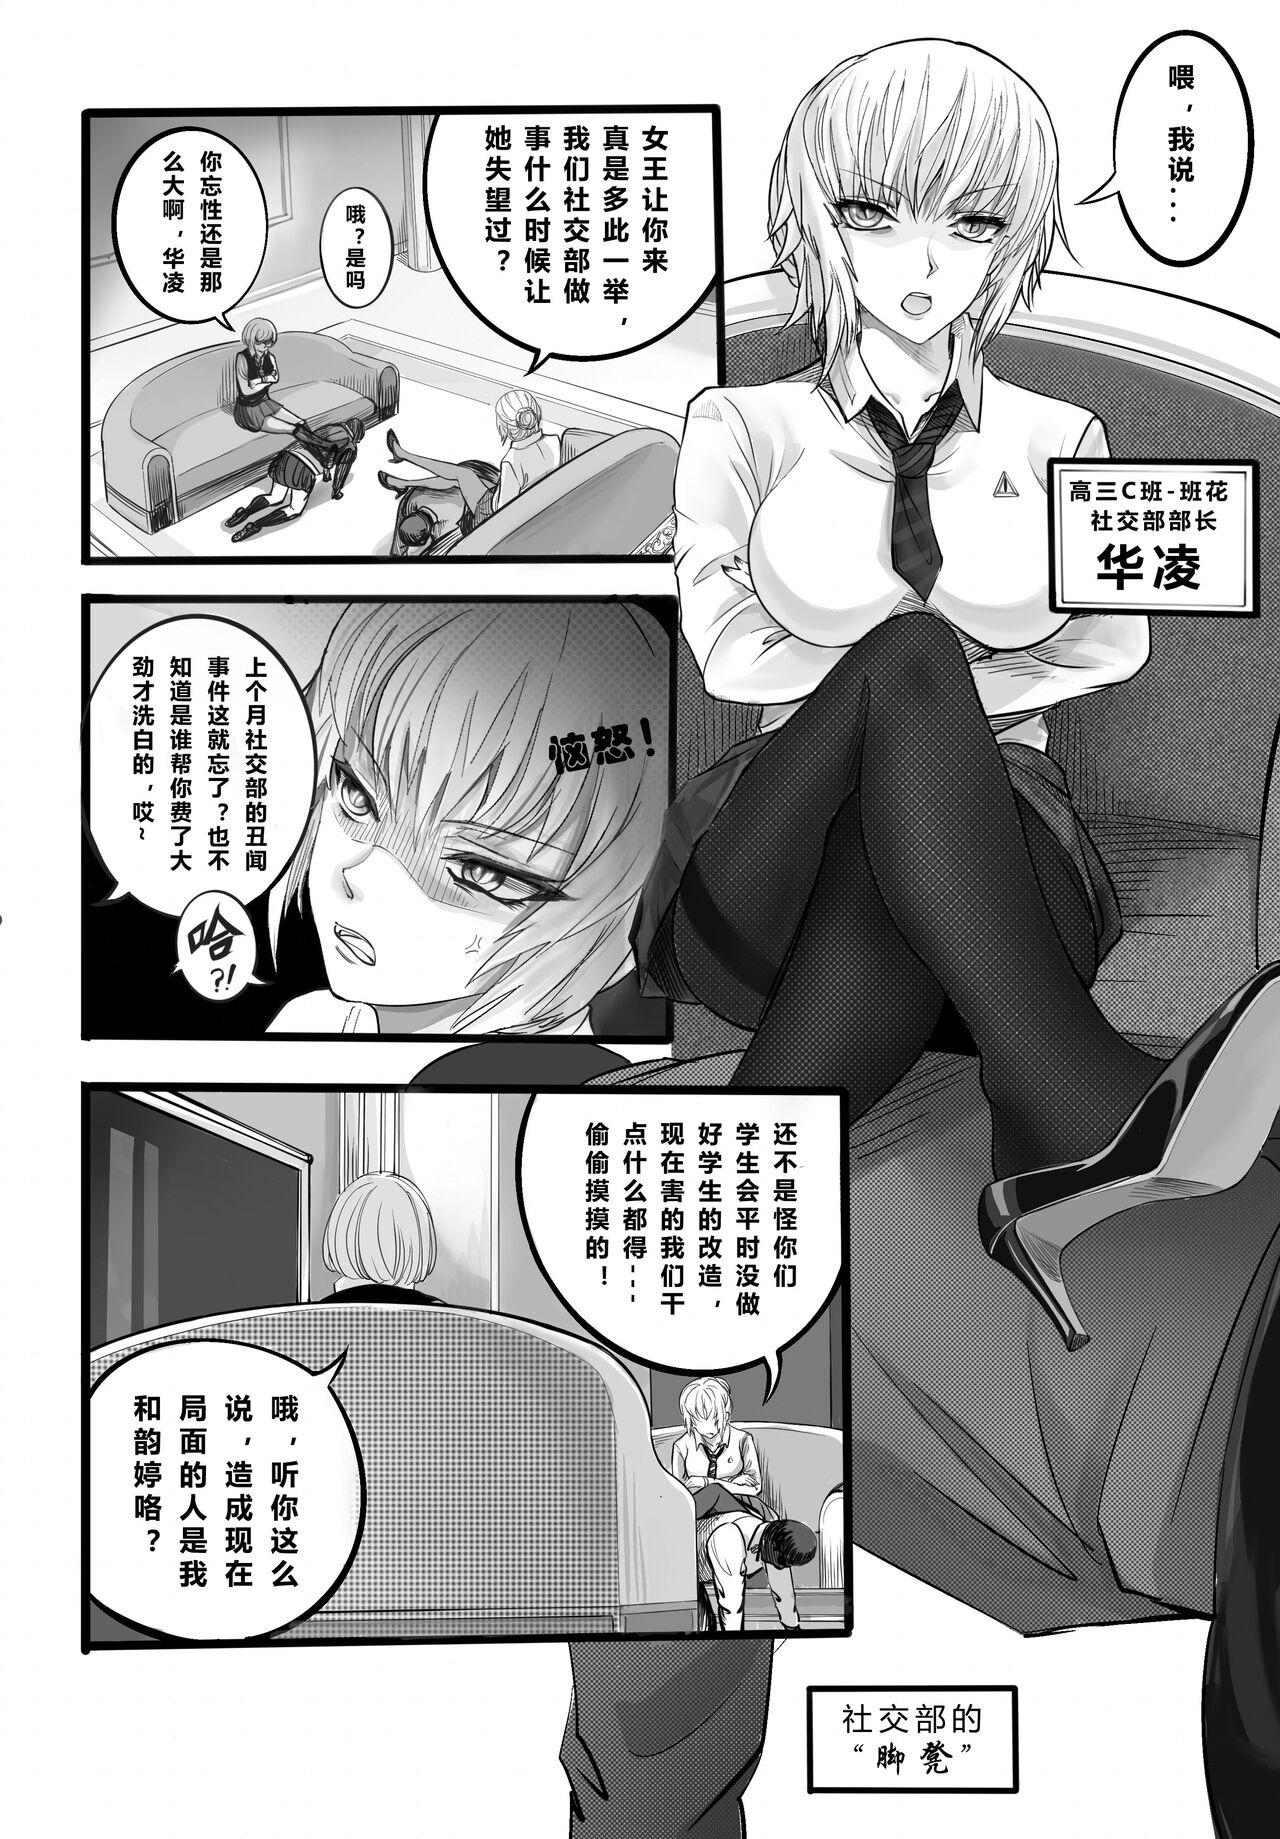 Rico GOAT-goat Ⅲ special chapter - Original Big Boobs - Page 2